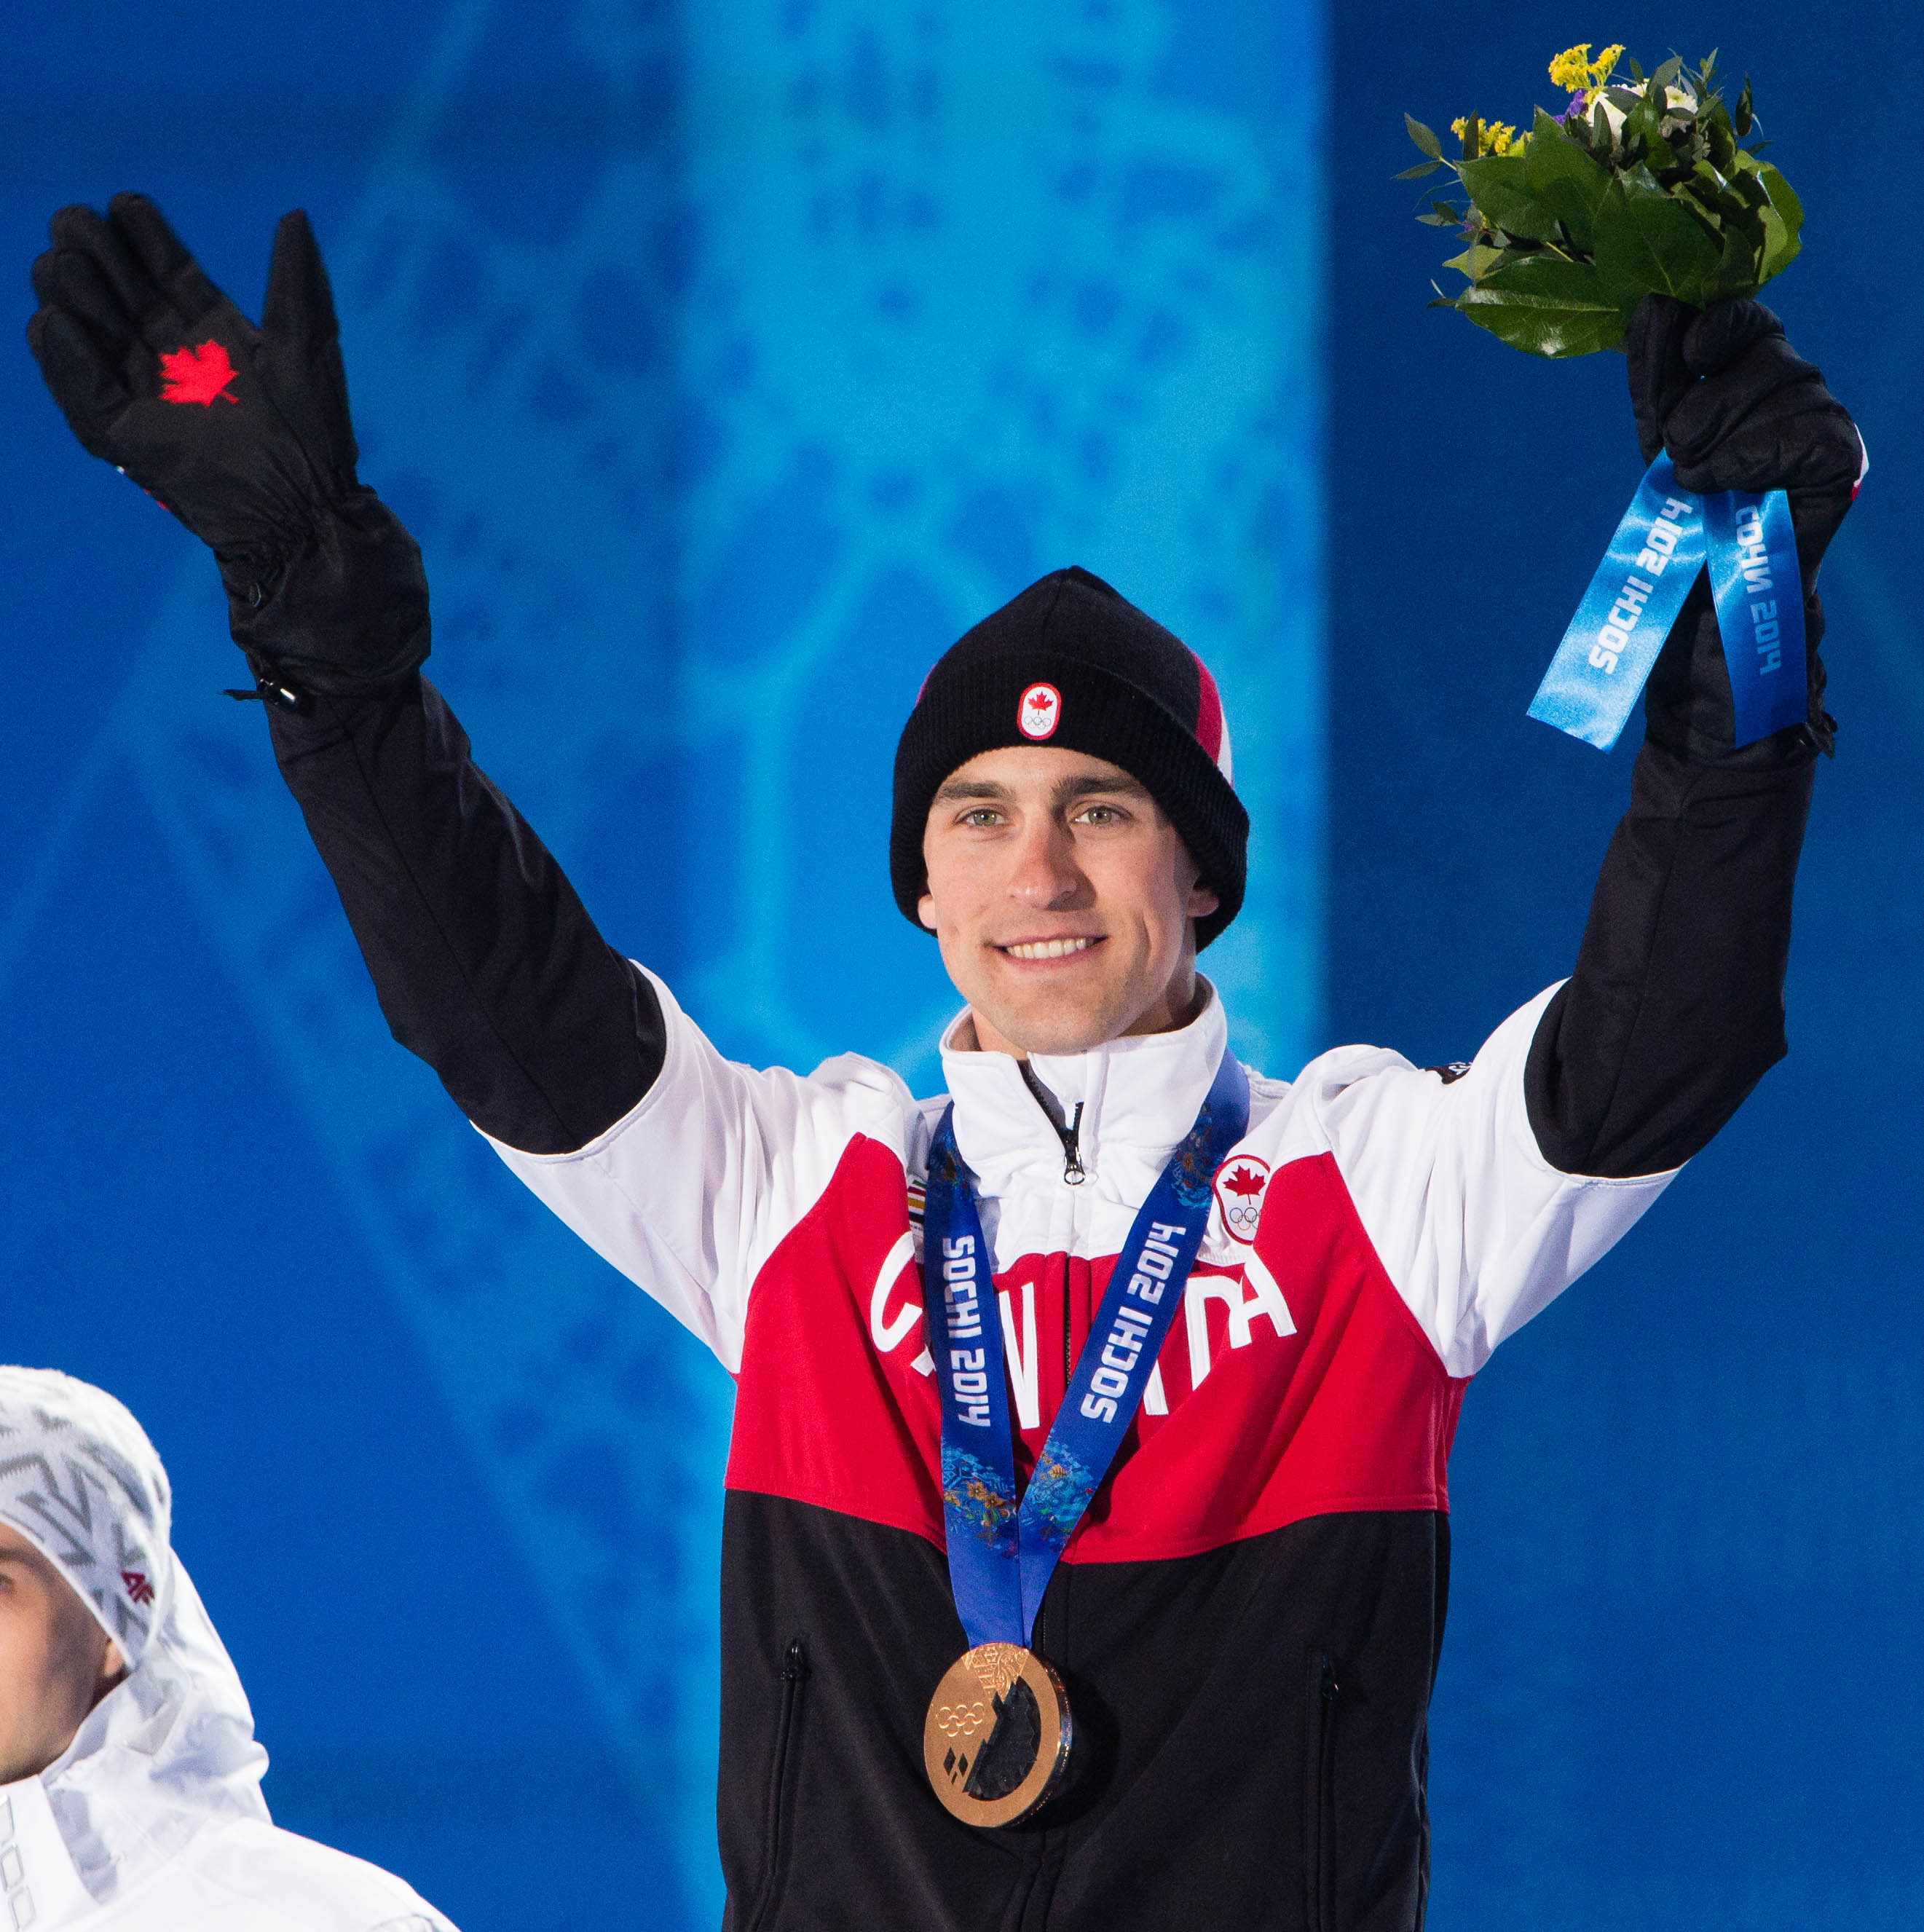 Denny Morrison receives the bronze medal in men's 1,500m long track speed skating at the 2014 Sochi Winter Olympics in Sochi, Russia, Sunday, Feb. 16, 2014. .THE CANADIAN PRESS/HO, COC - Winston Chow